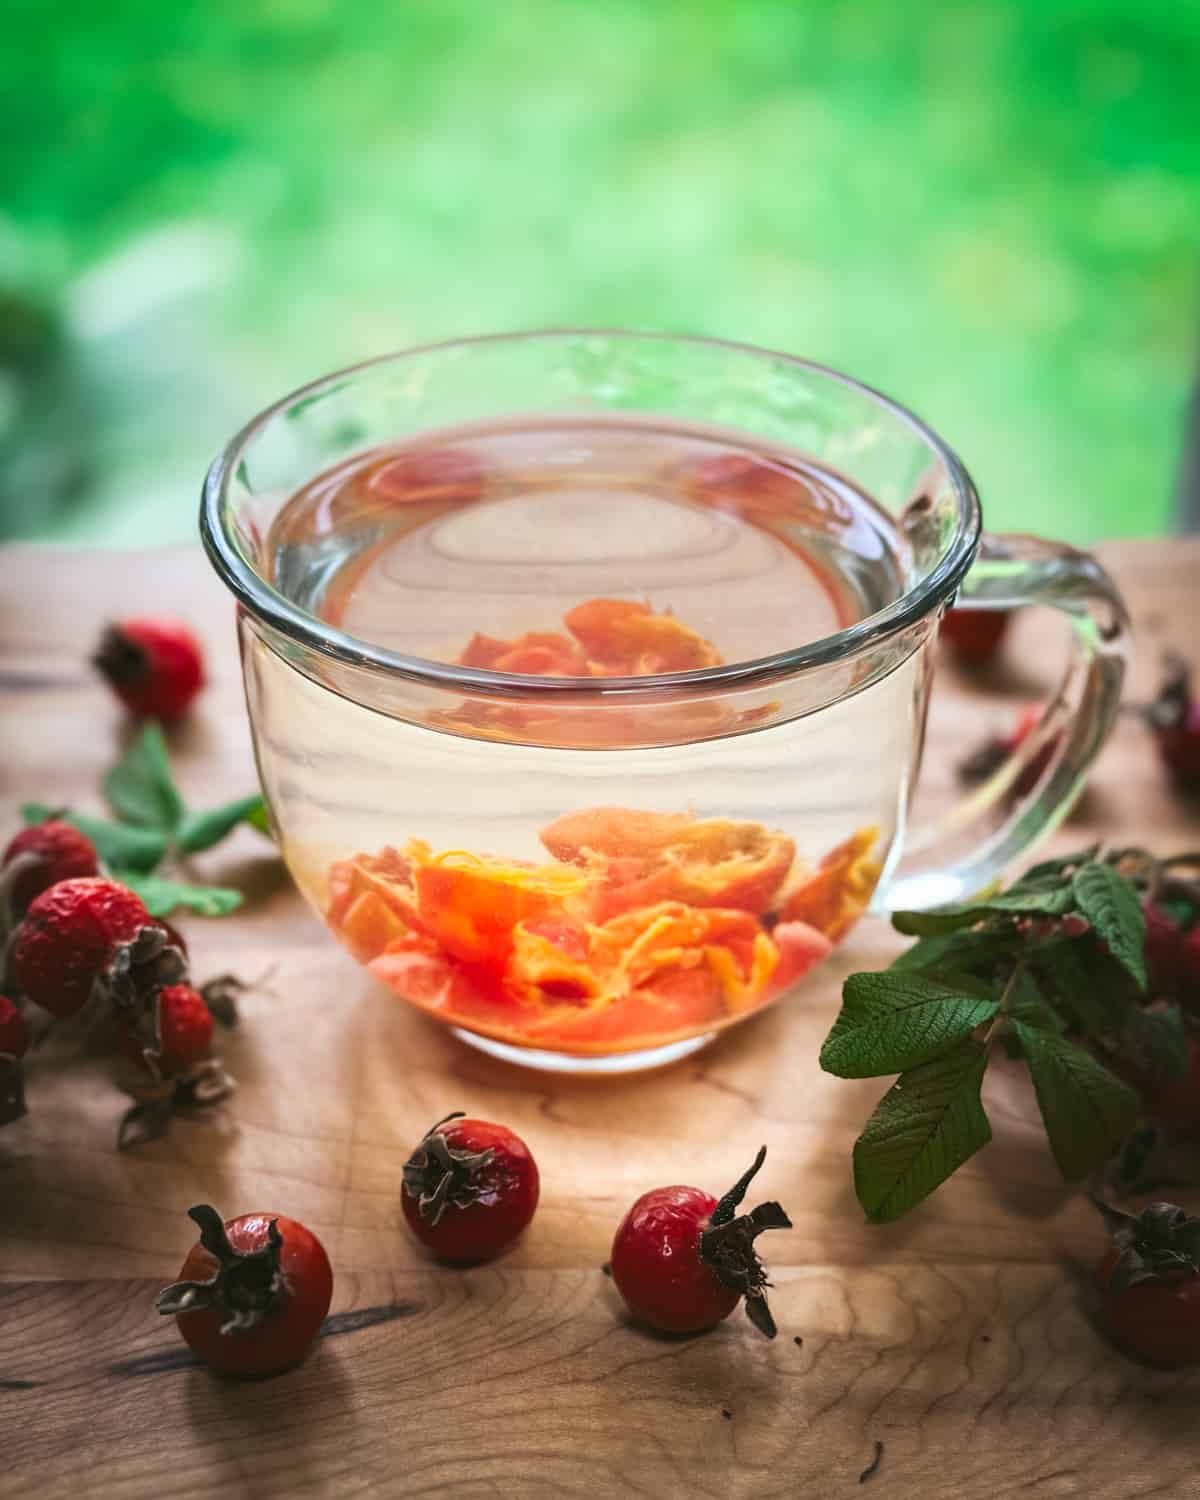 Rose hips straining in hot water for tea in a clear mug, surrounded by fresh rose hips, with a window in the background for natural light. 